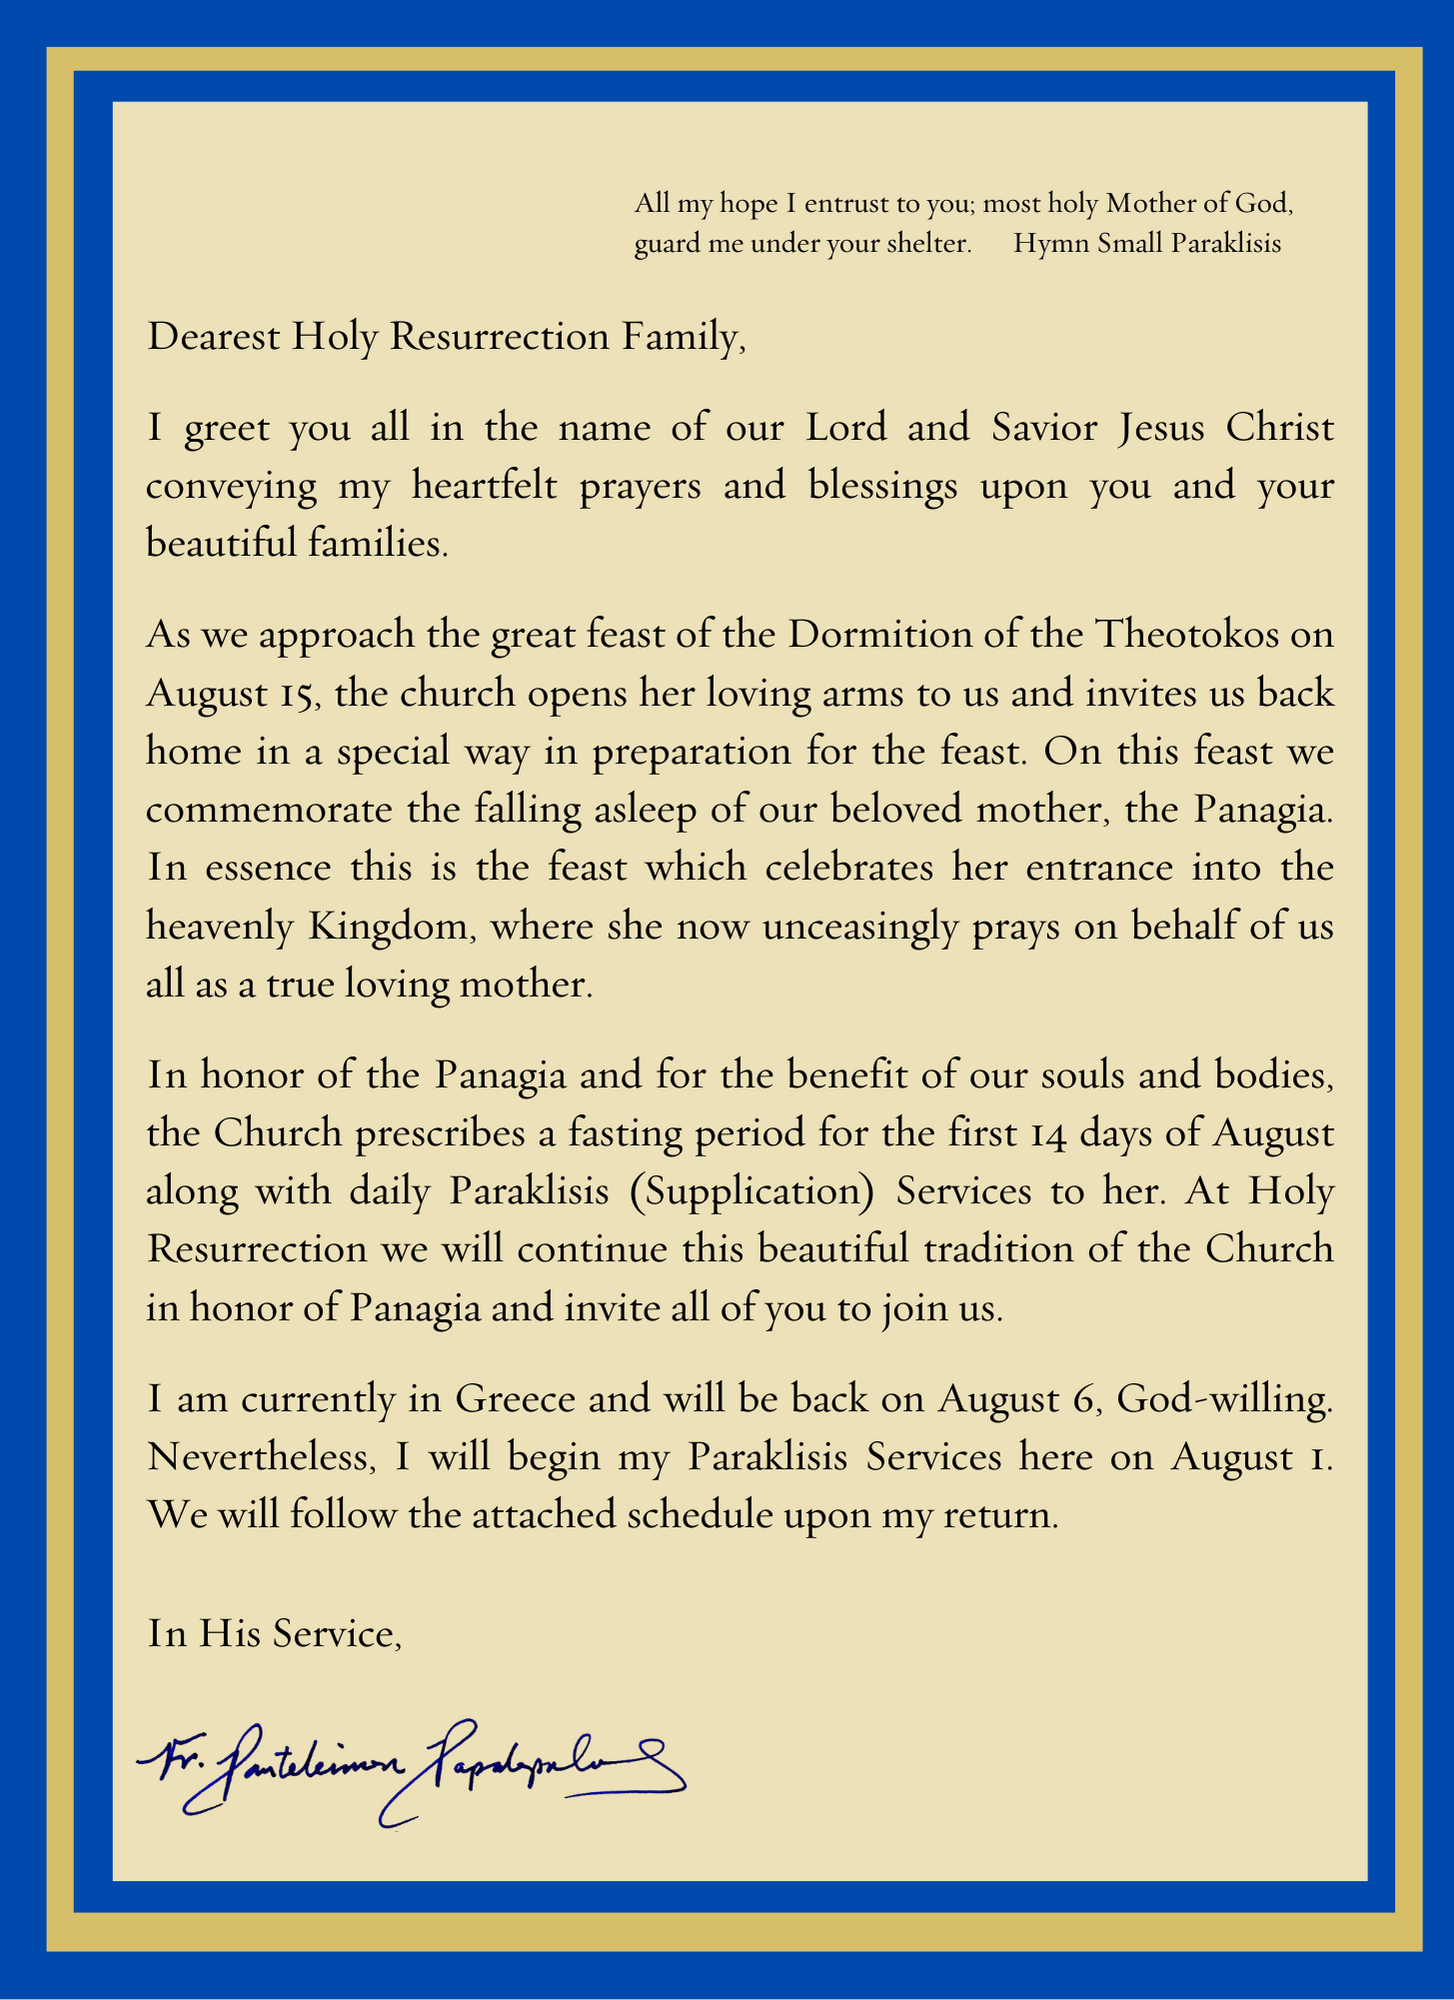 Special Message from Father Panteleimon for the Dormition of the Theotokos